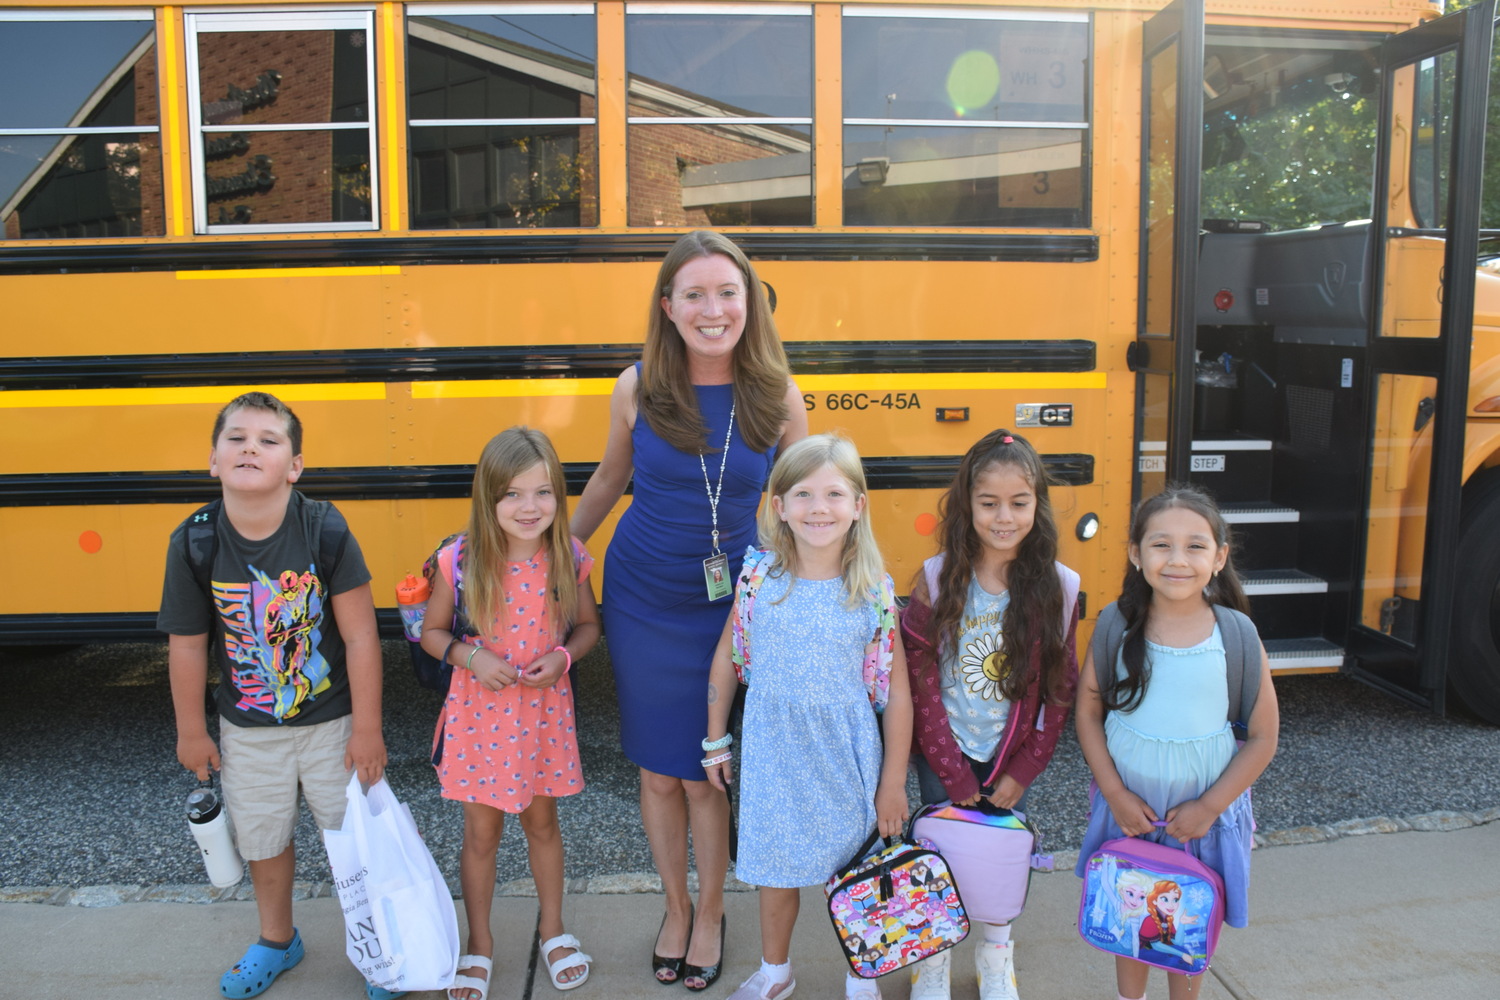 Westhampton Beach School District Superintendent Carolyn Probst greeted students as they arrived back at school on September 6. COURTESY WESTHAMPTON BEACH SCHOOL DISTRICT